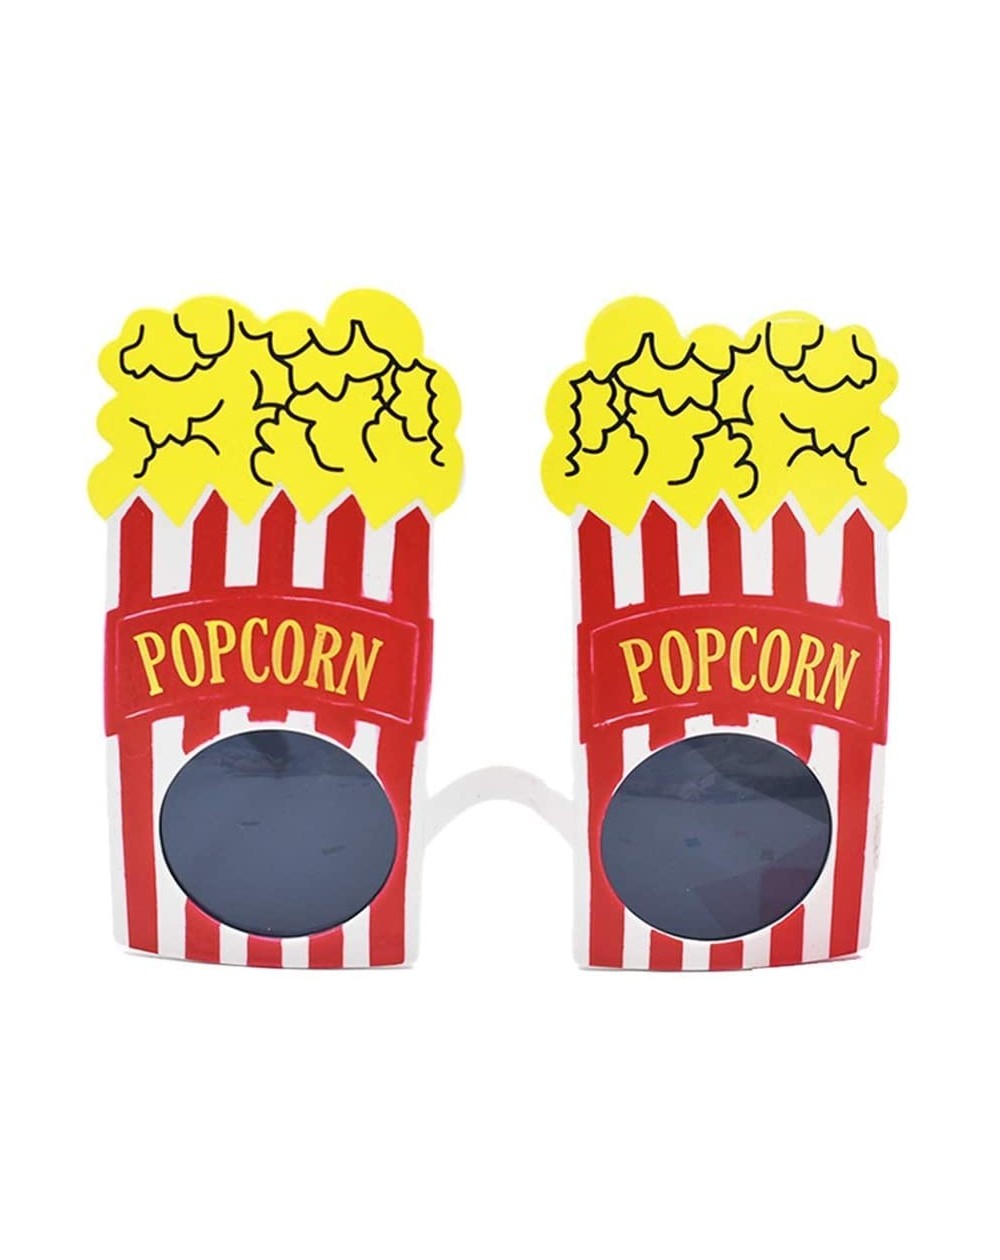 Party Favors Popcorn Shape Eyewear Novelty Funny Eyeglasses Party Sunglasses for Carnival Masquerade Trick Party Costume Prop...